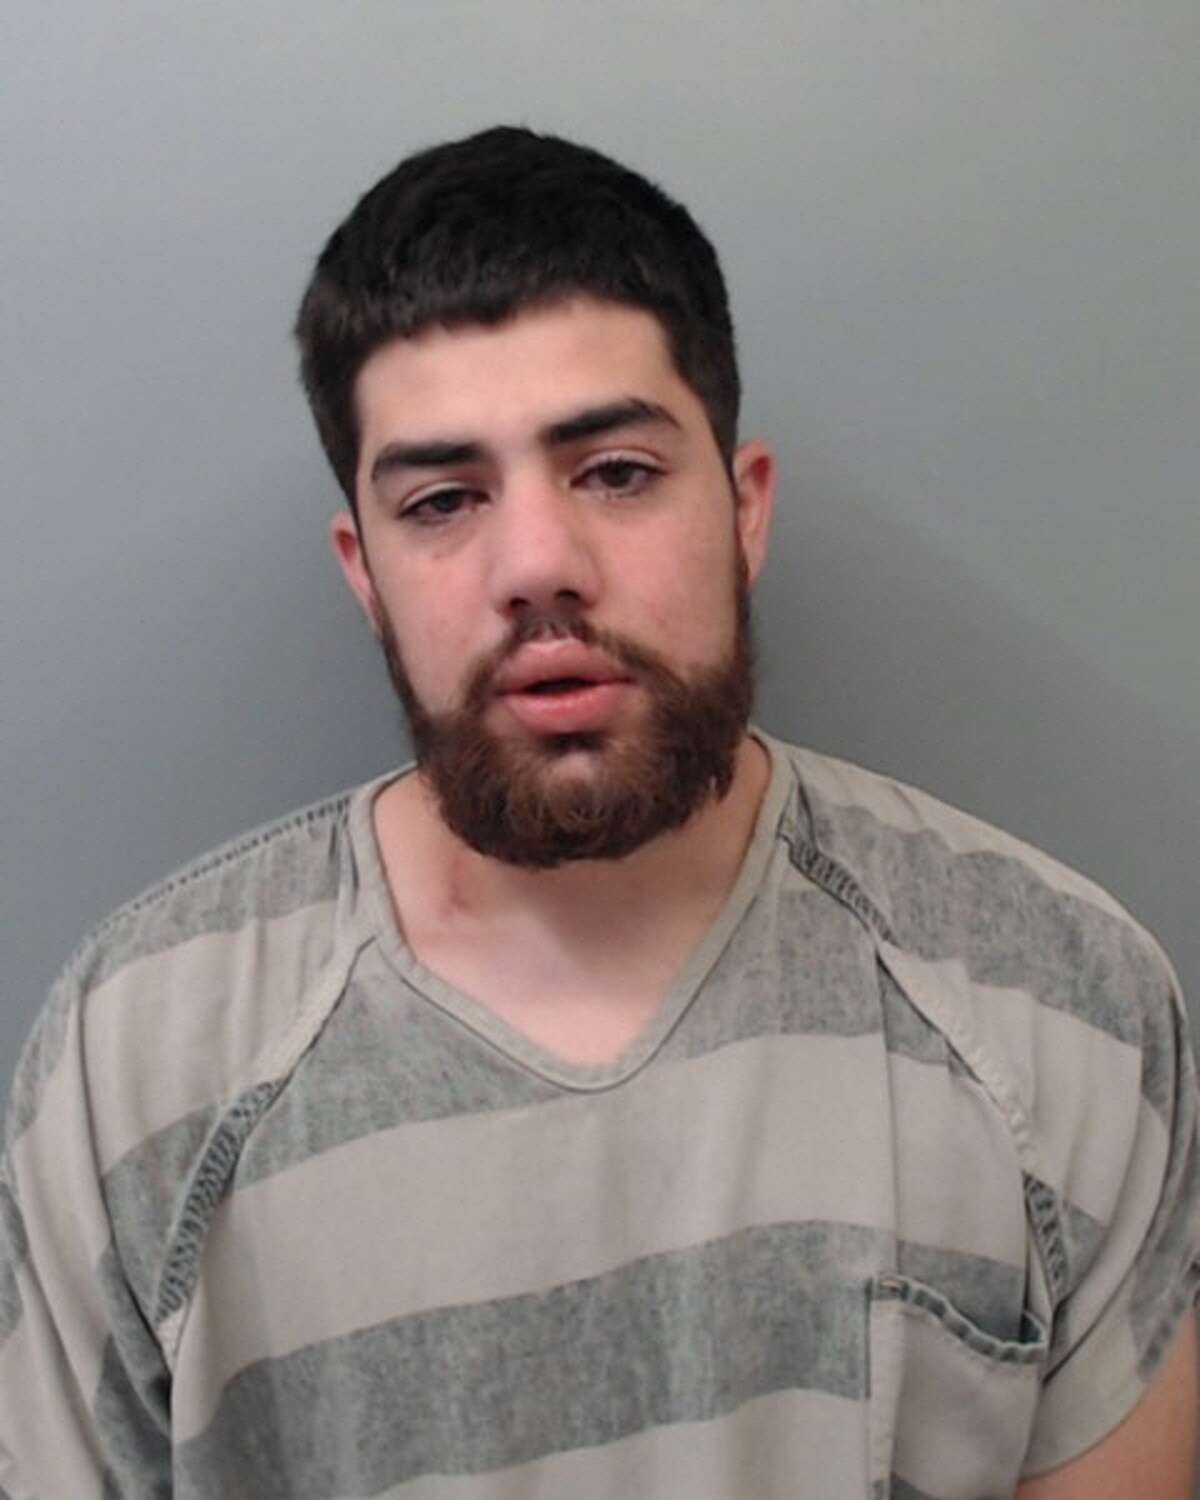 Aldo Armin Almendarez, 22, was charged with burglary of a vehicle and theft of property.